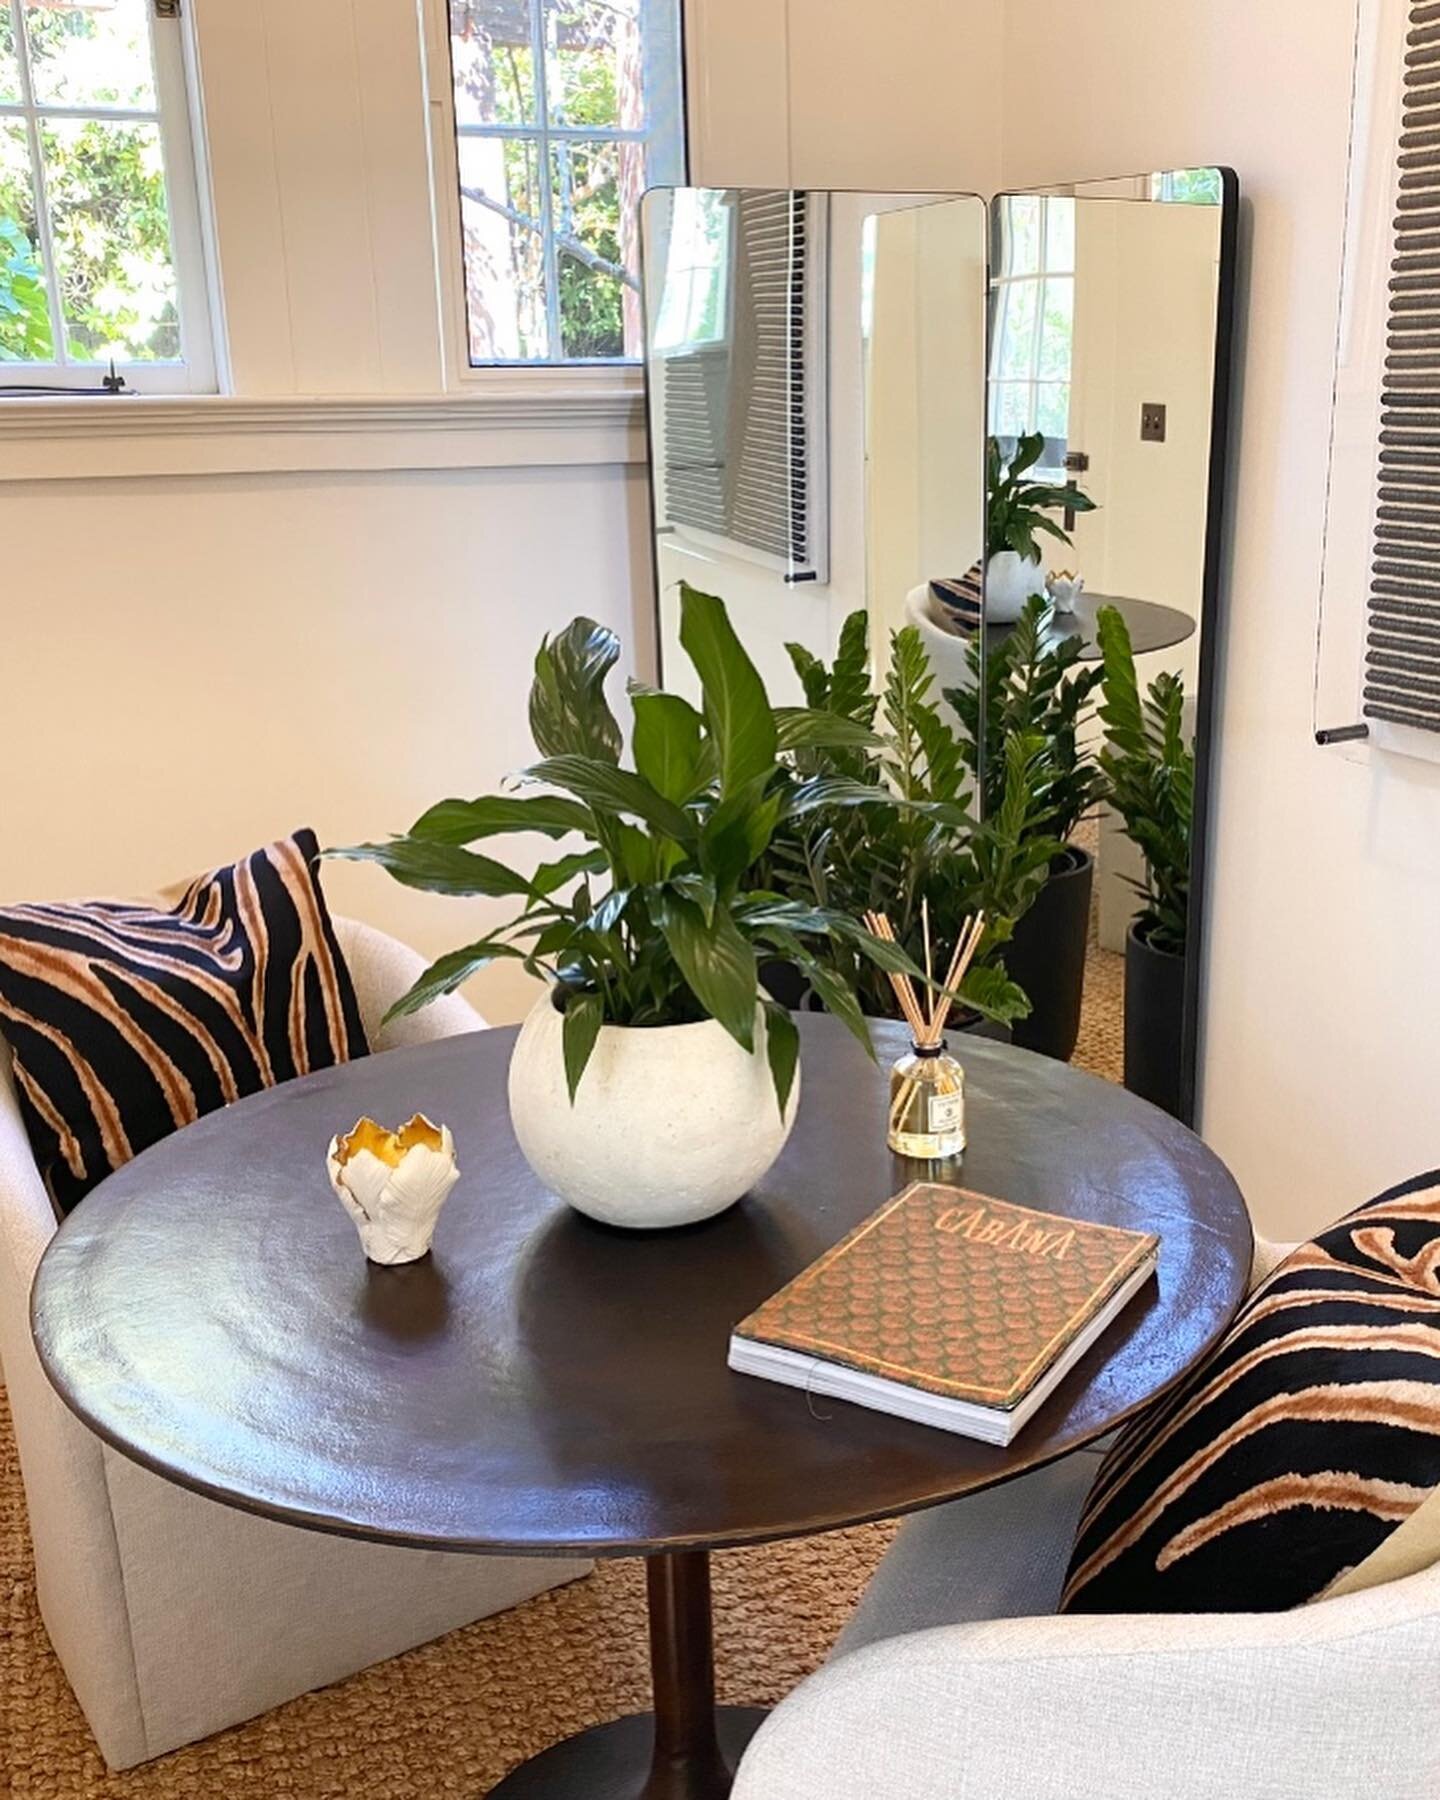 CUSTOM. Zebra footstool and pillows for our clients&rsquo; Santa Barbara studio. 🤎 (They look good in my office too 😊)
#hollykanedesign #montecito #santabarbara #californiahomedesign #customfurniture